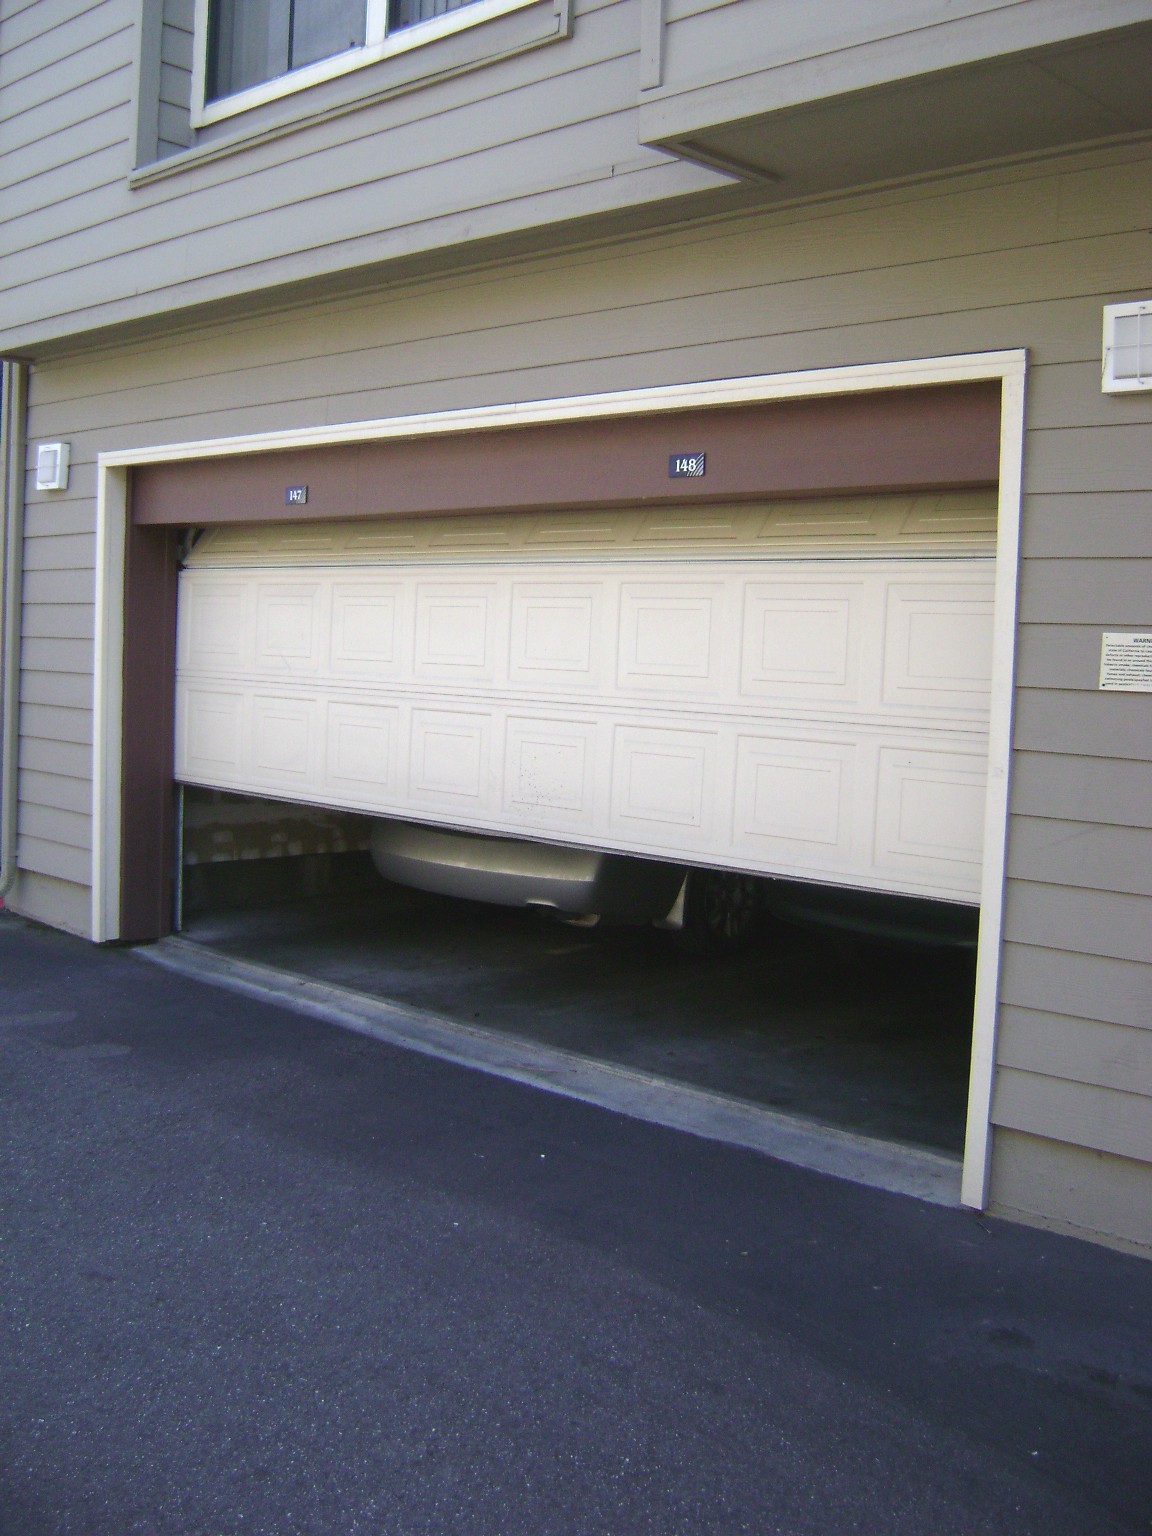 Garage Door Rails Have Any Safety Features